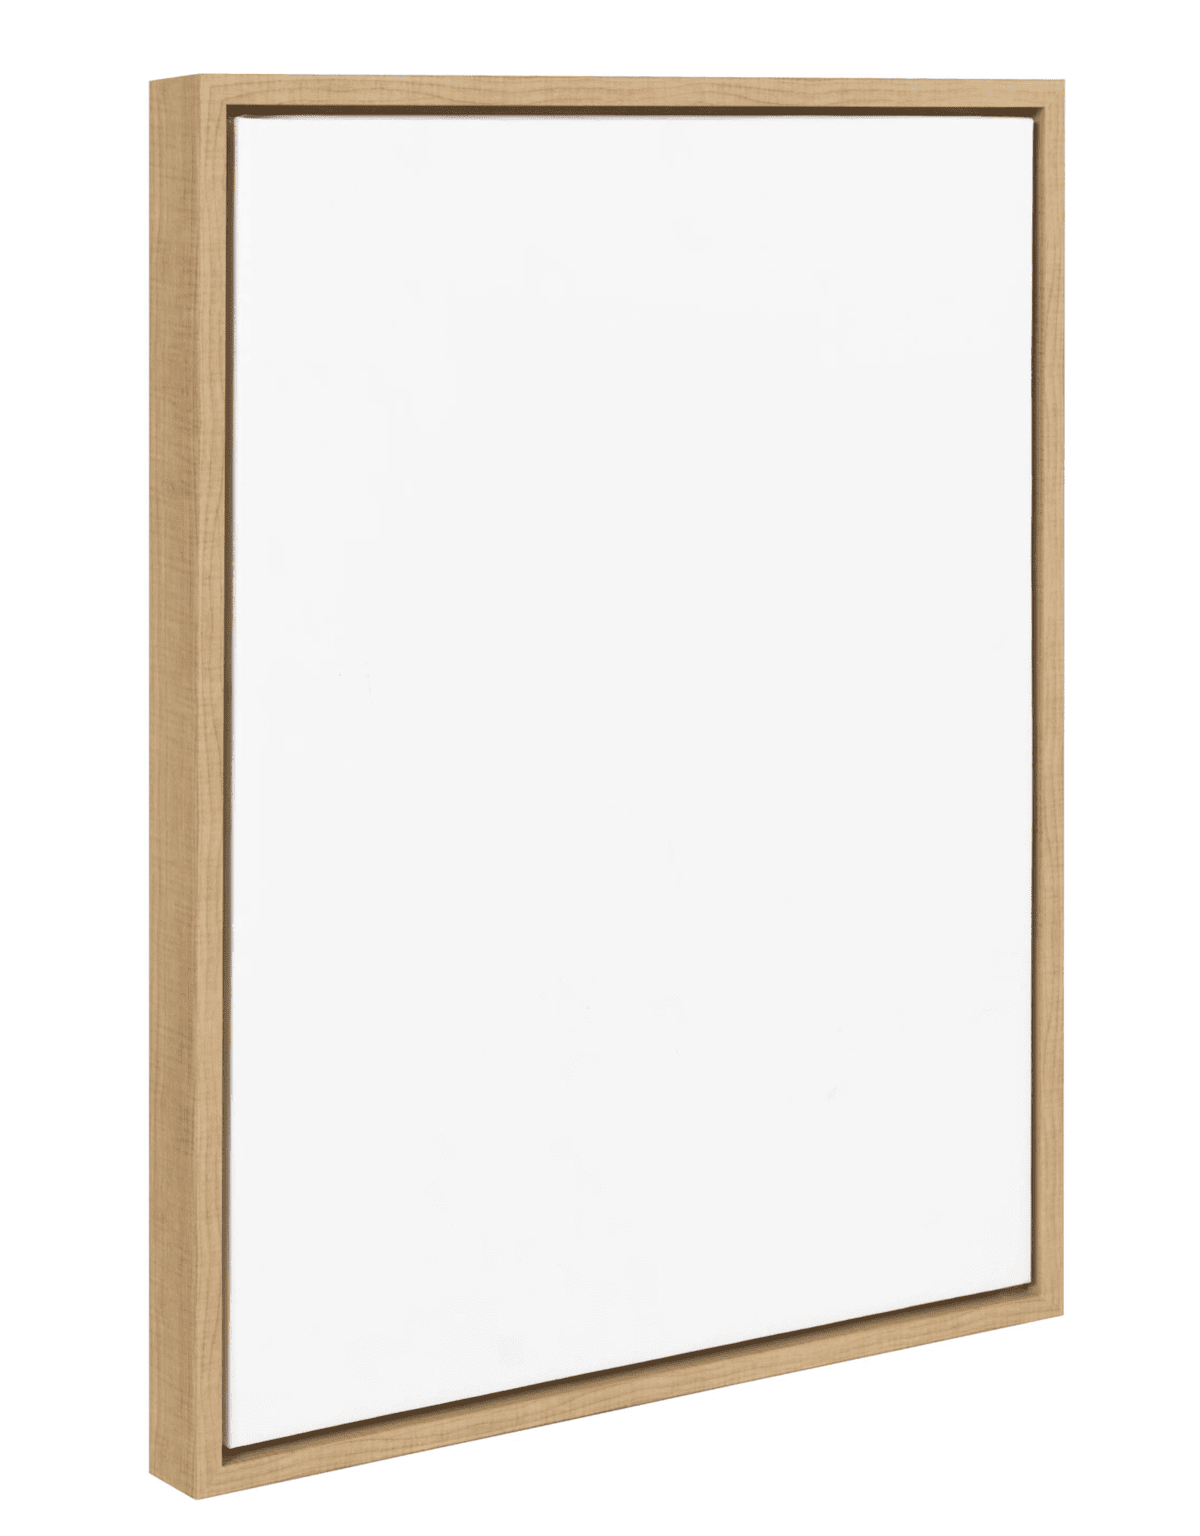 Framed Blank Canvas Blank Canvas on Floater Frame Blank Canvas With Solid  Wood Frame DIY Art Ready to Hang 